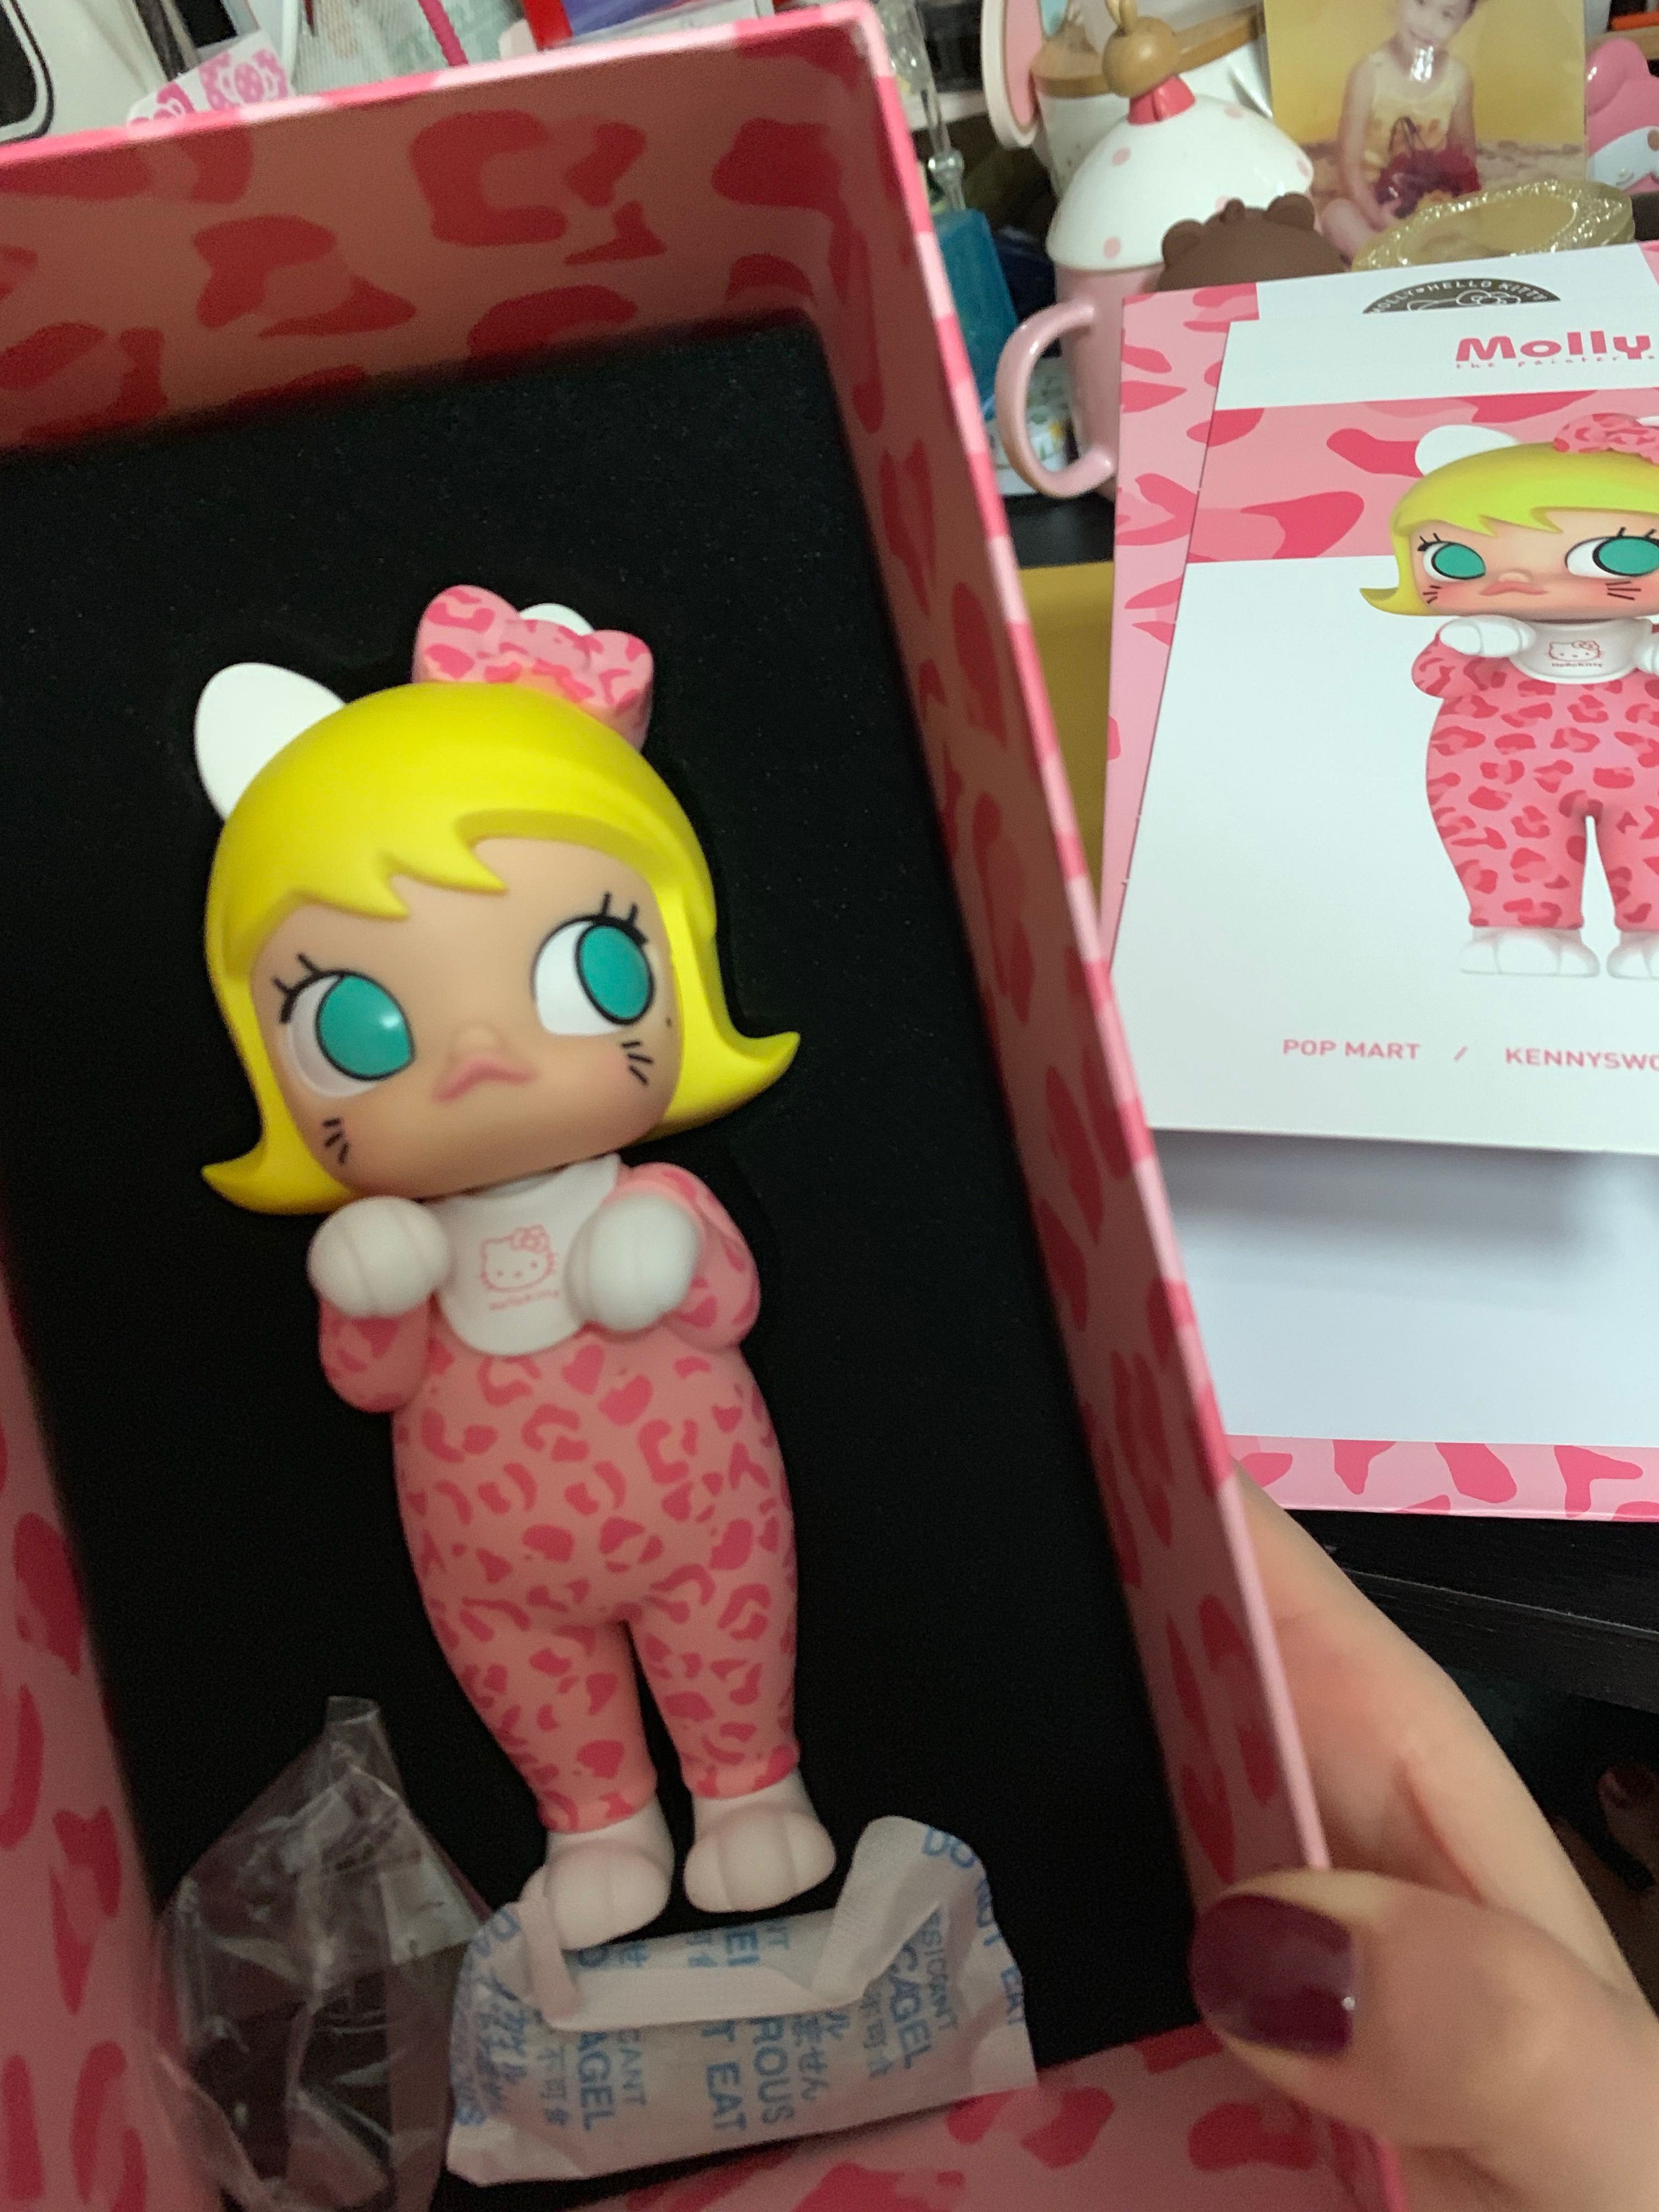 Molly hello Kitty pop mart limited edition